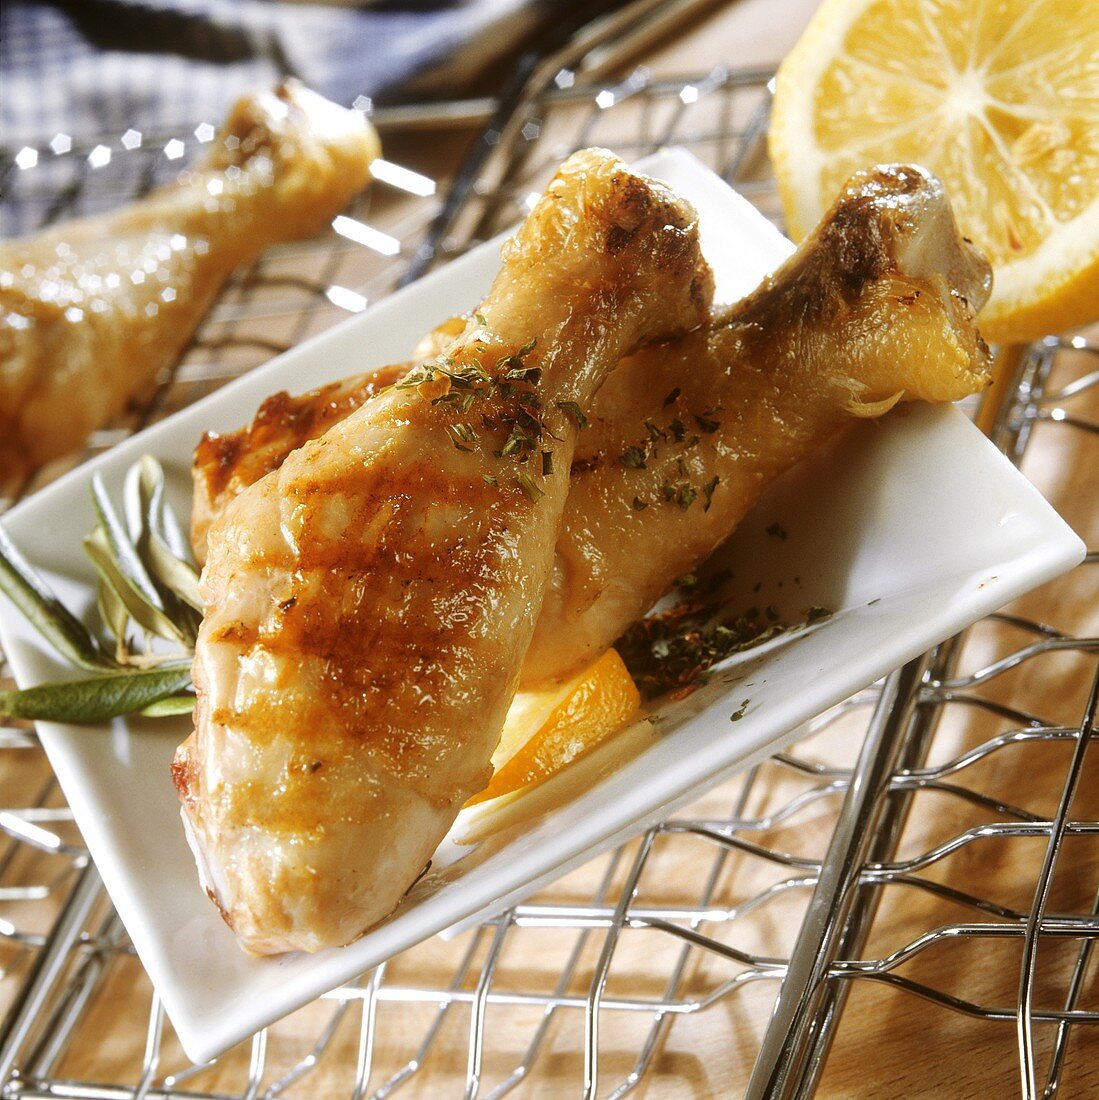 Barbecued chicken legs with herbs and lemon